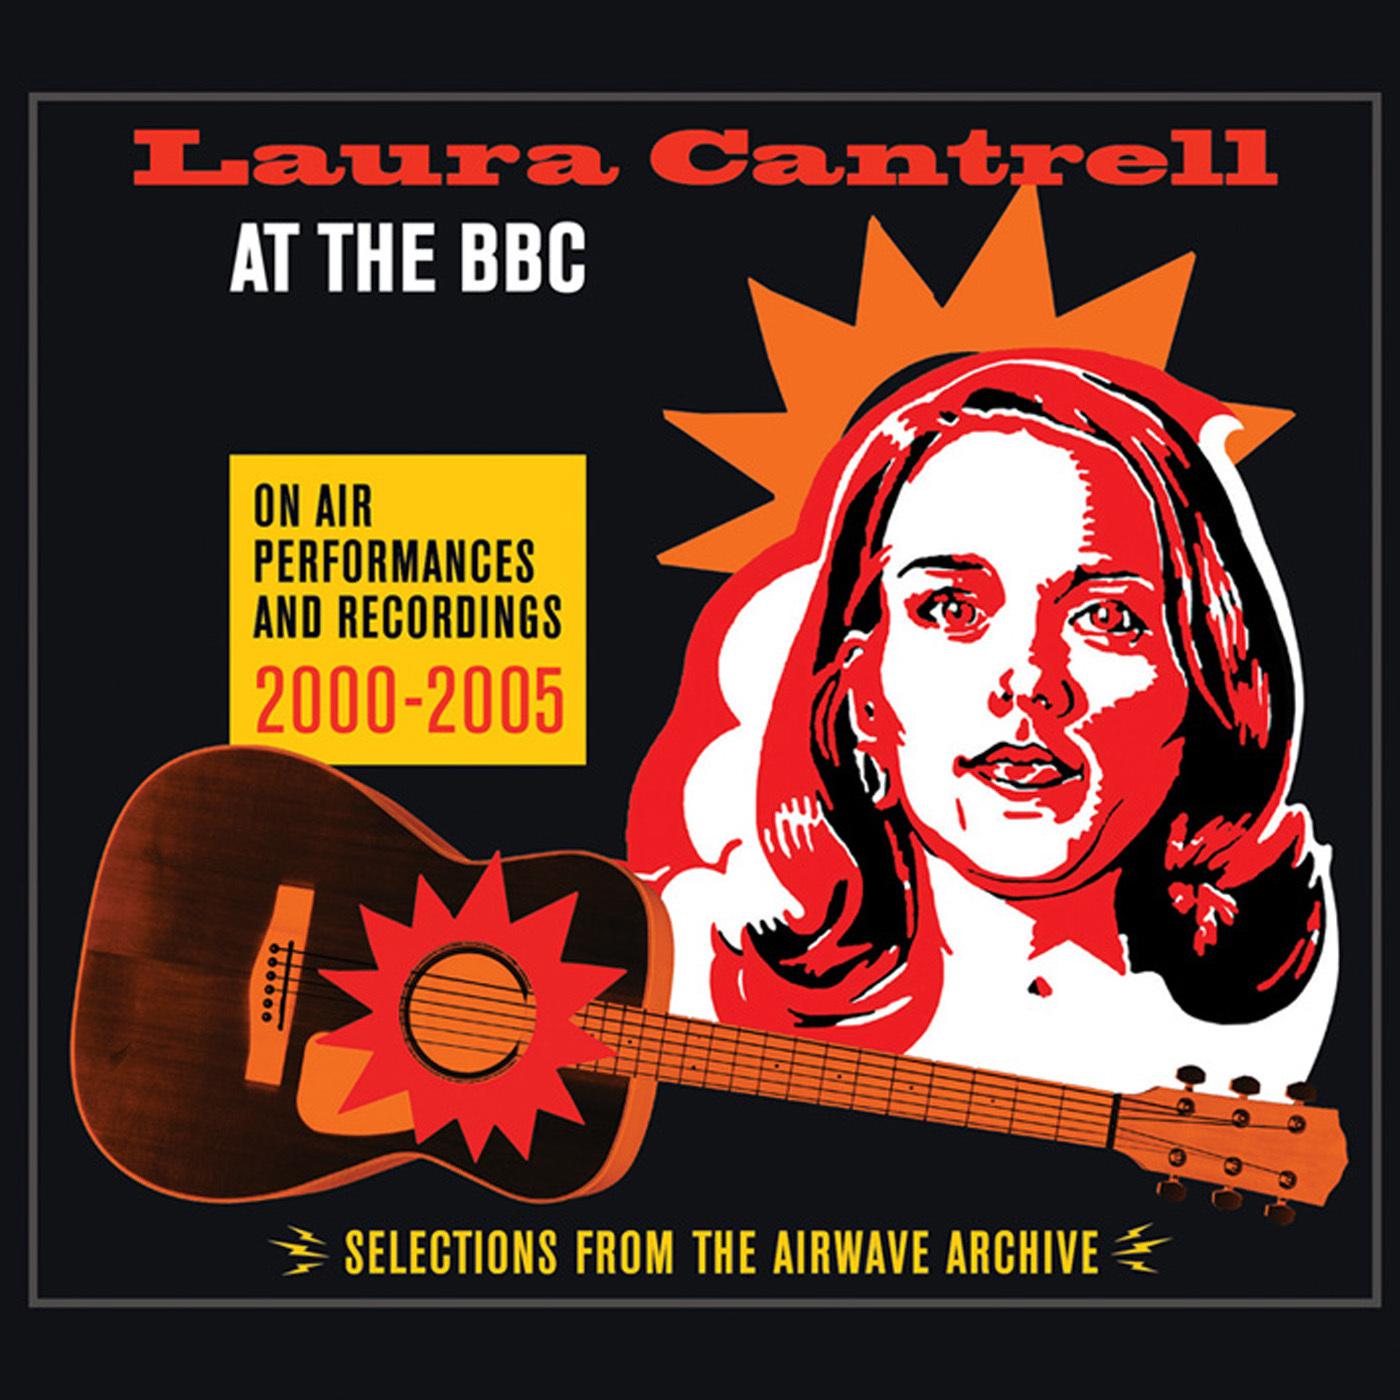 Laura Cantrell - The Whiskey Makes You Sweeter